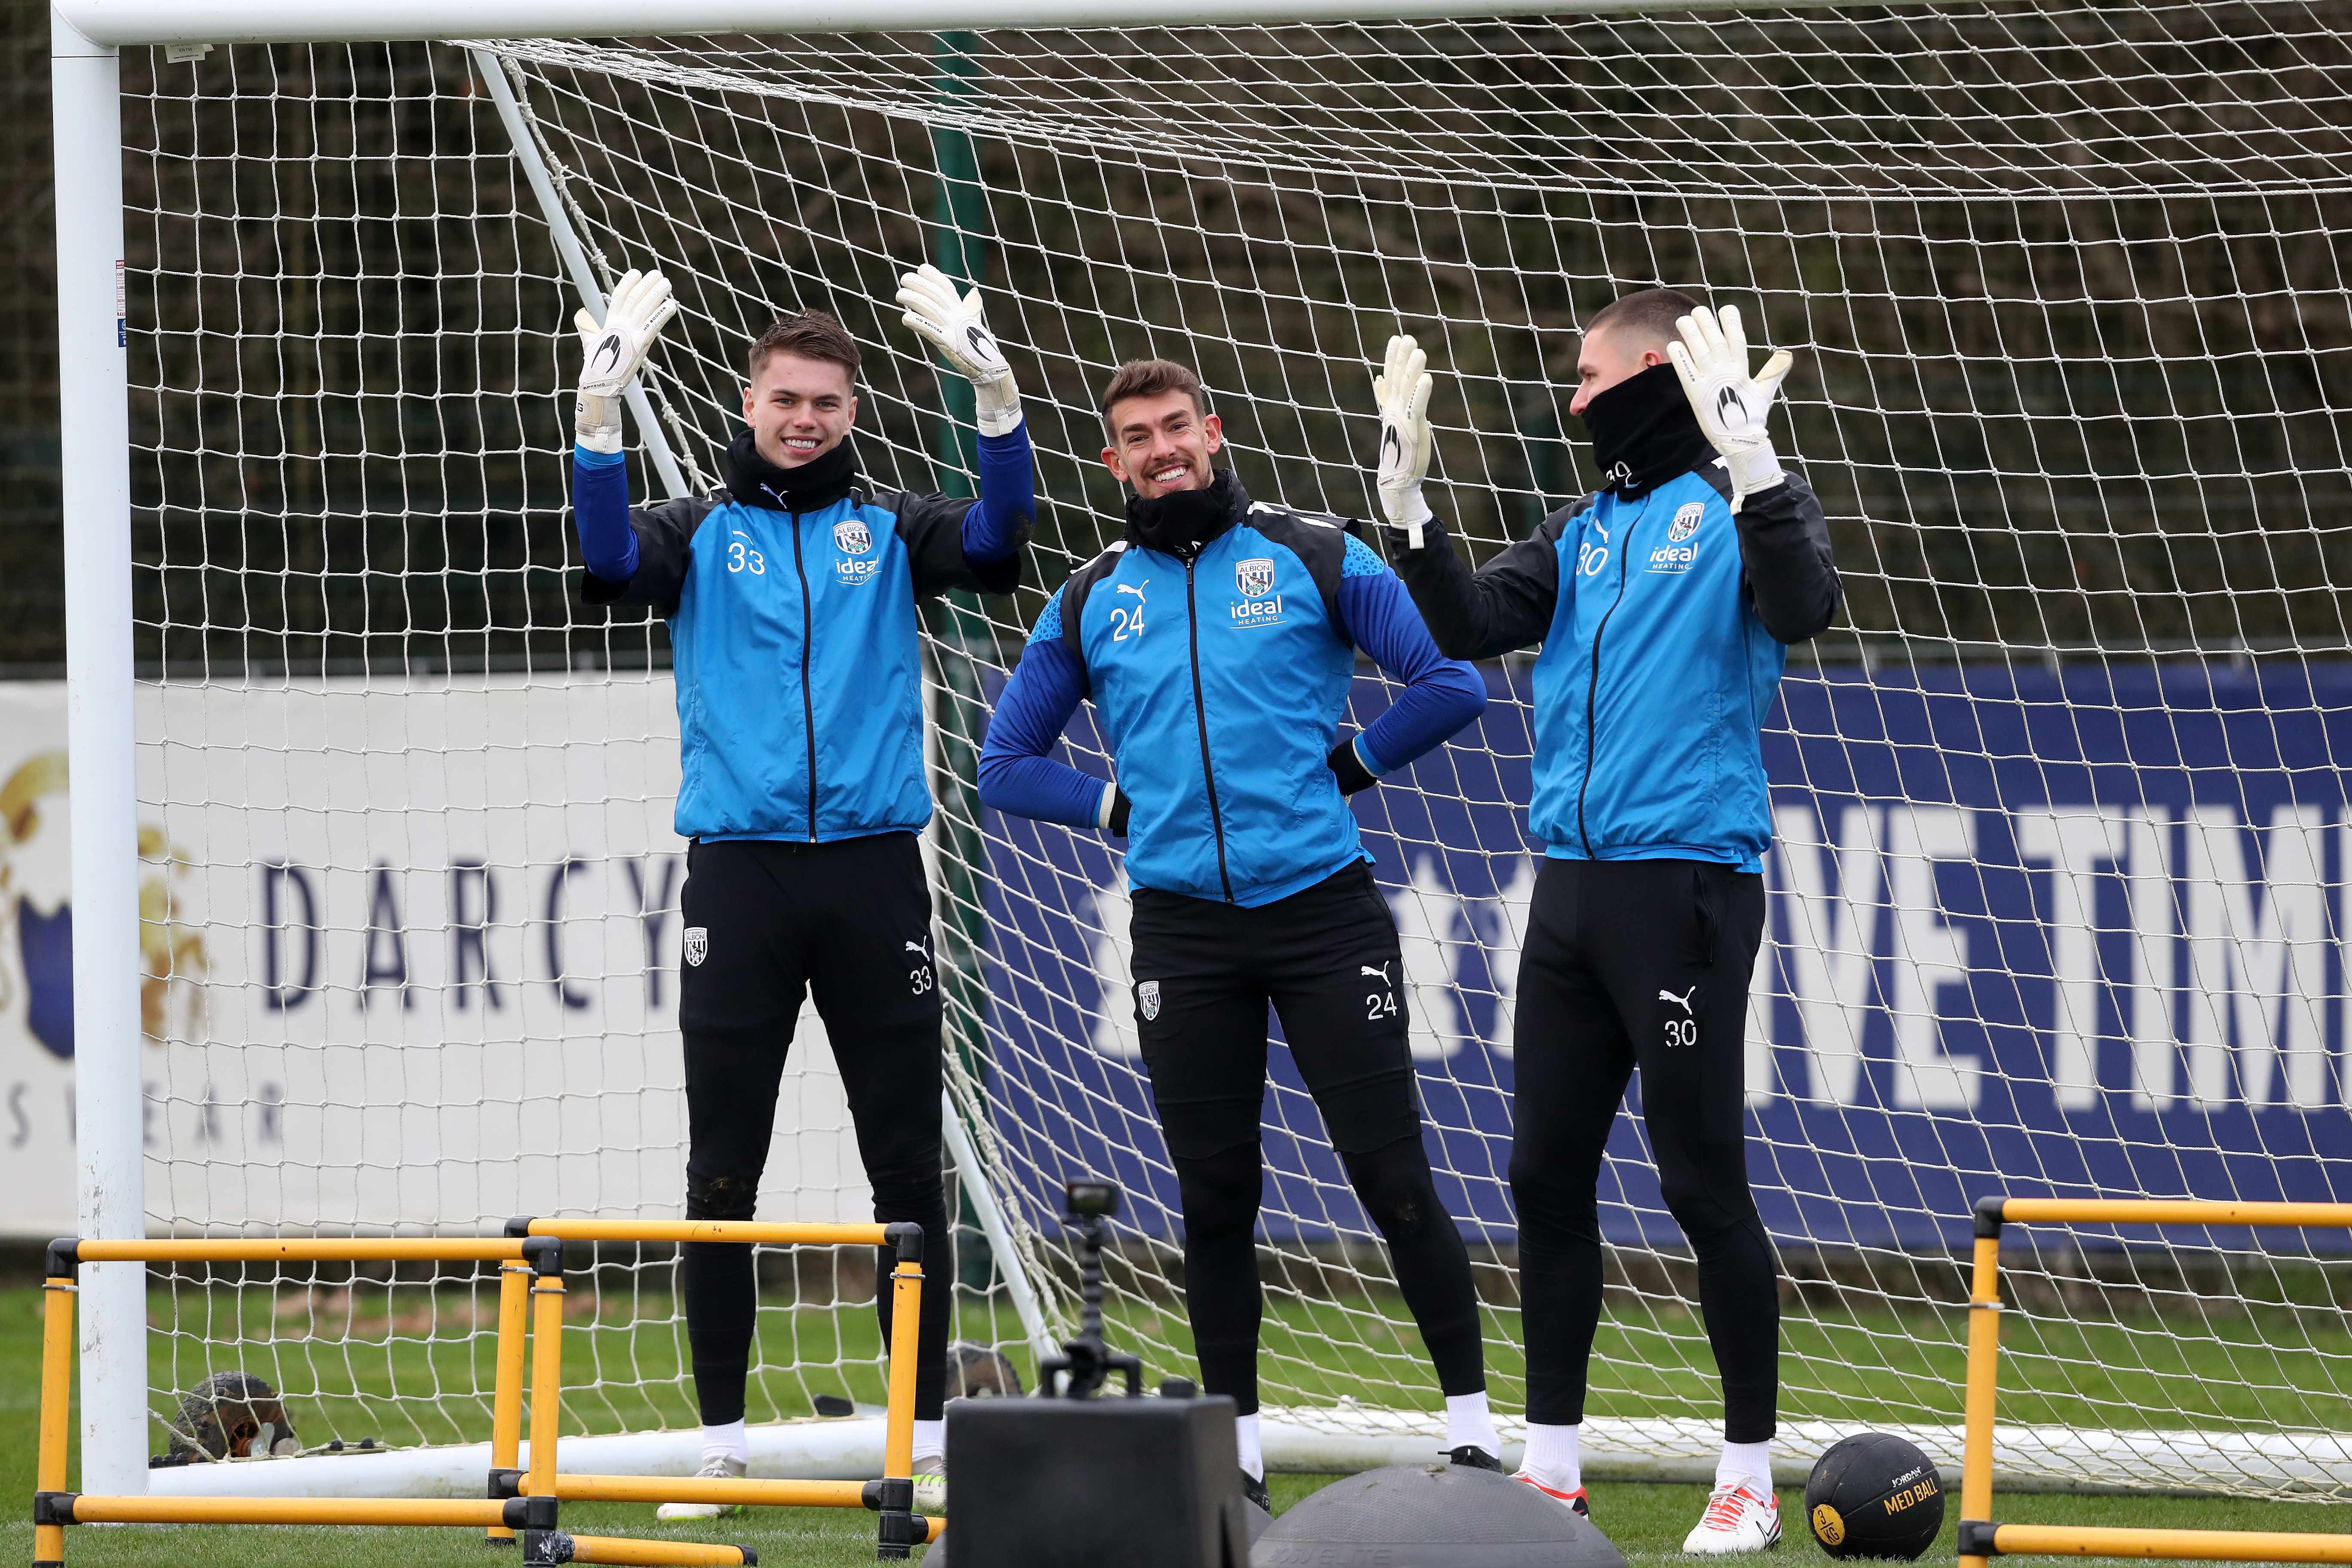 Albion players in training ahead of the clash with Blackburn Rovers.